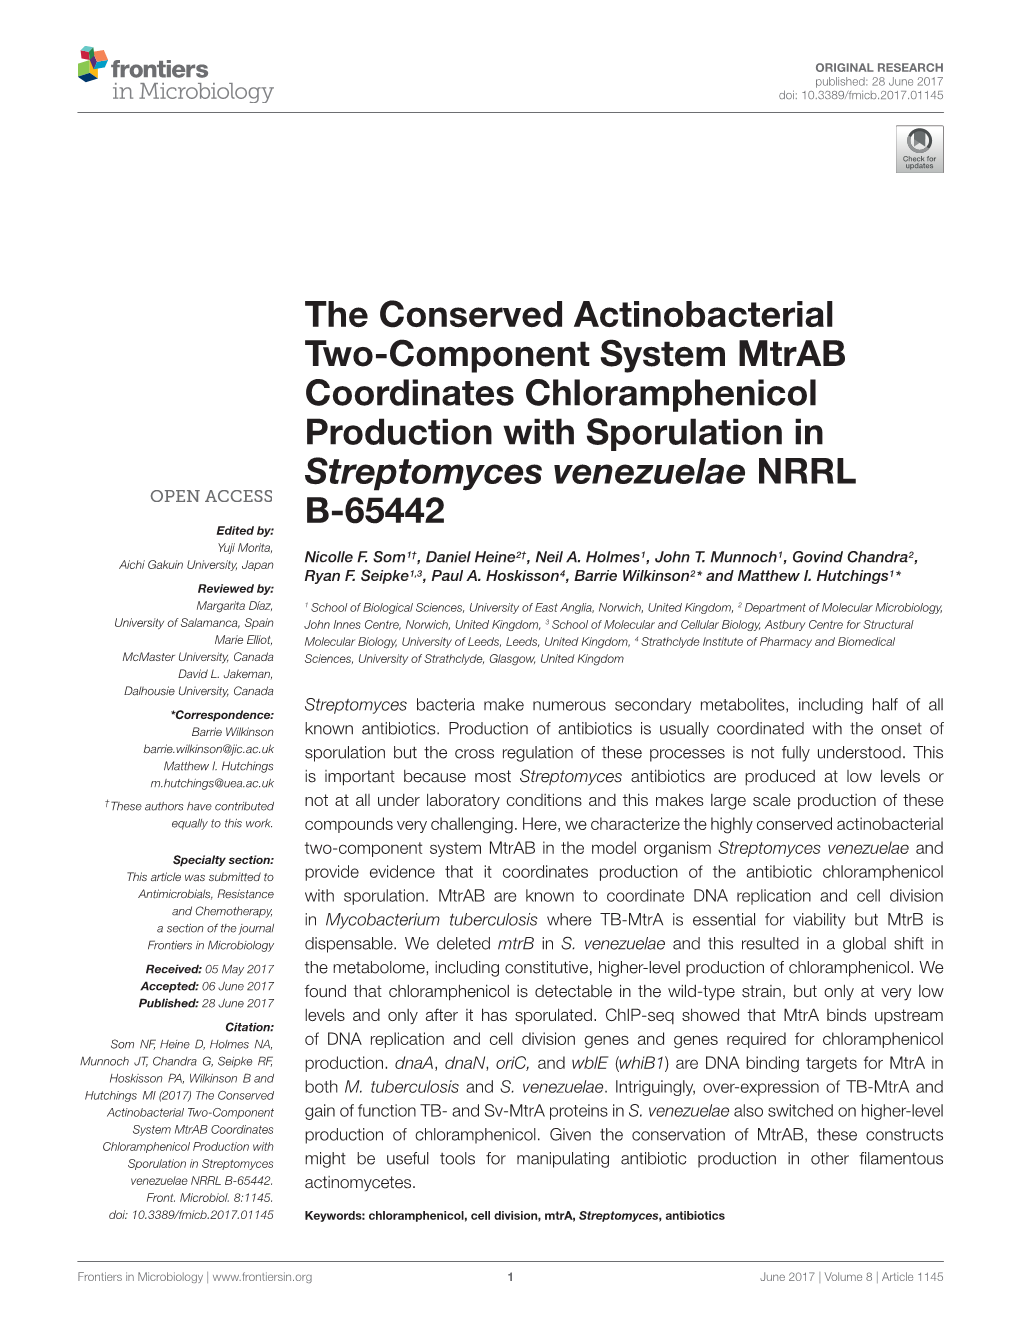 The Conserved Actinobacterial Two-Component System Mtrab